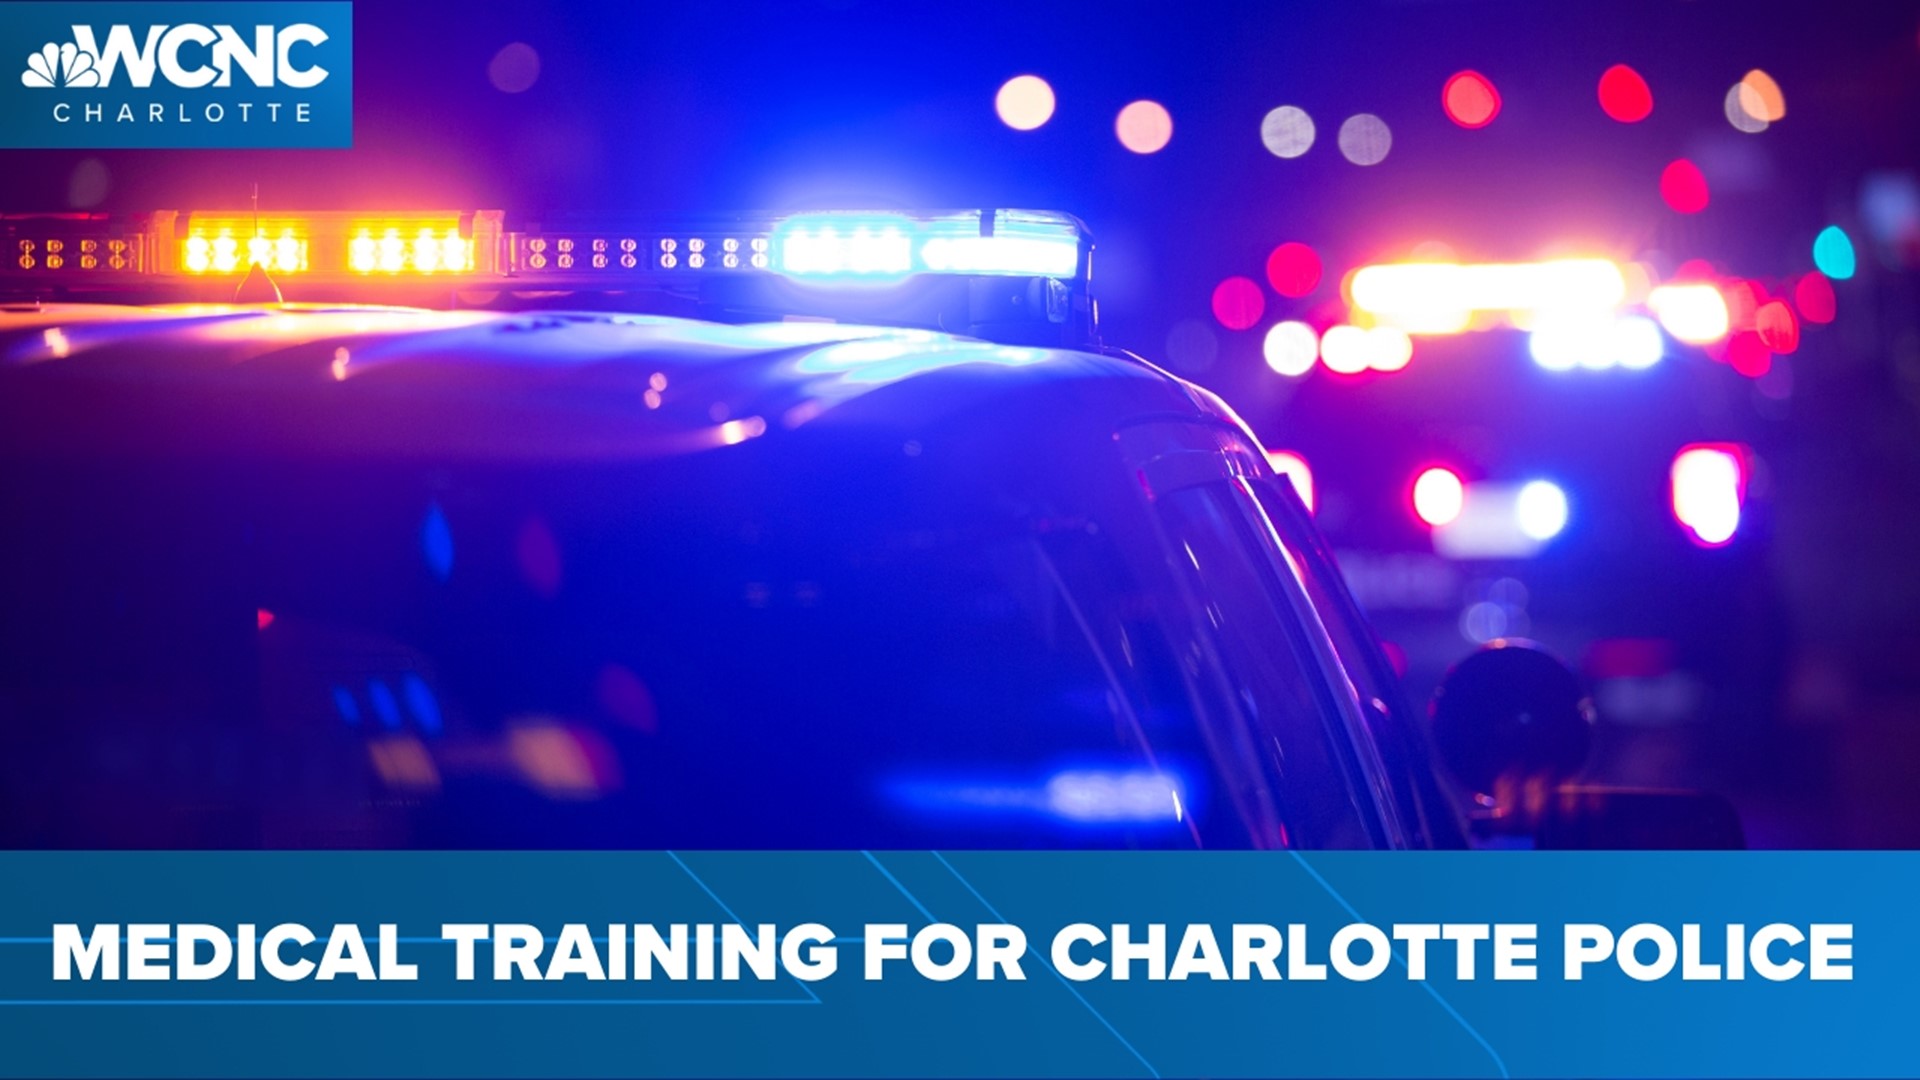 A tactical medical training program that CMPD deployed two years ago is starting to see results.